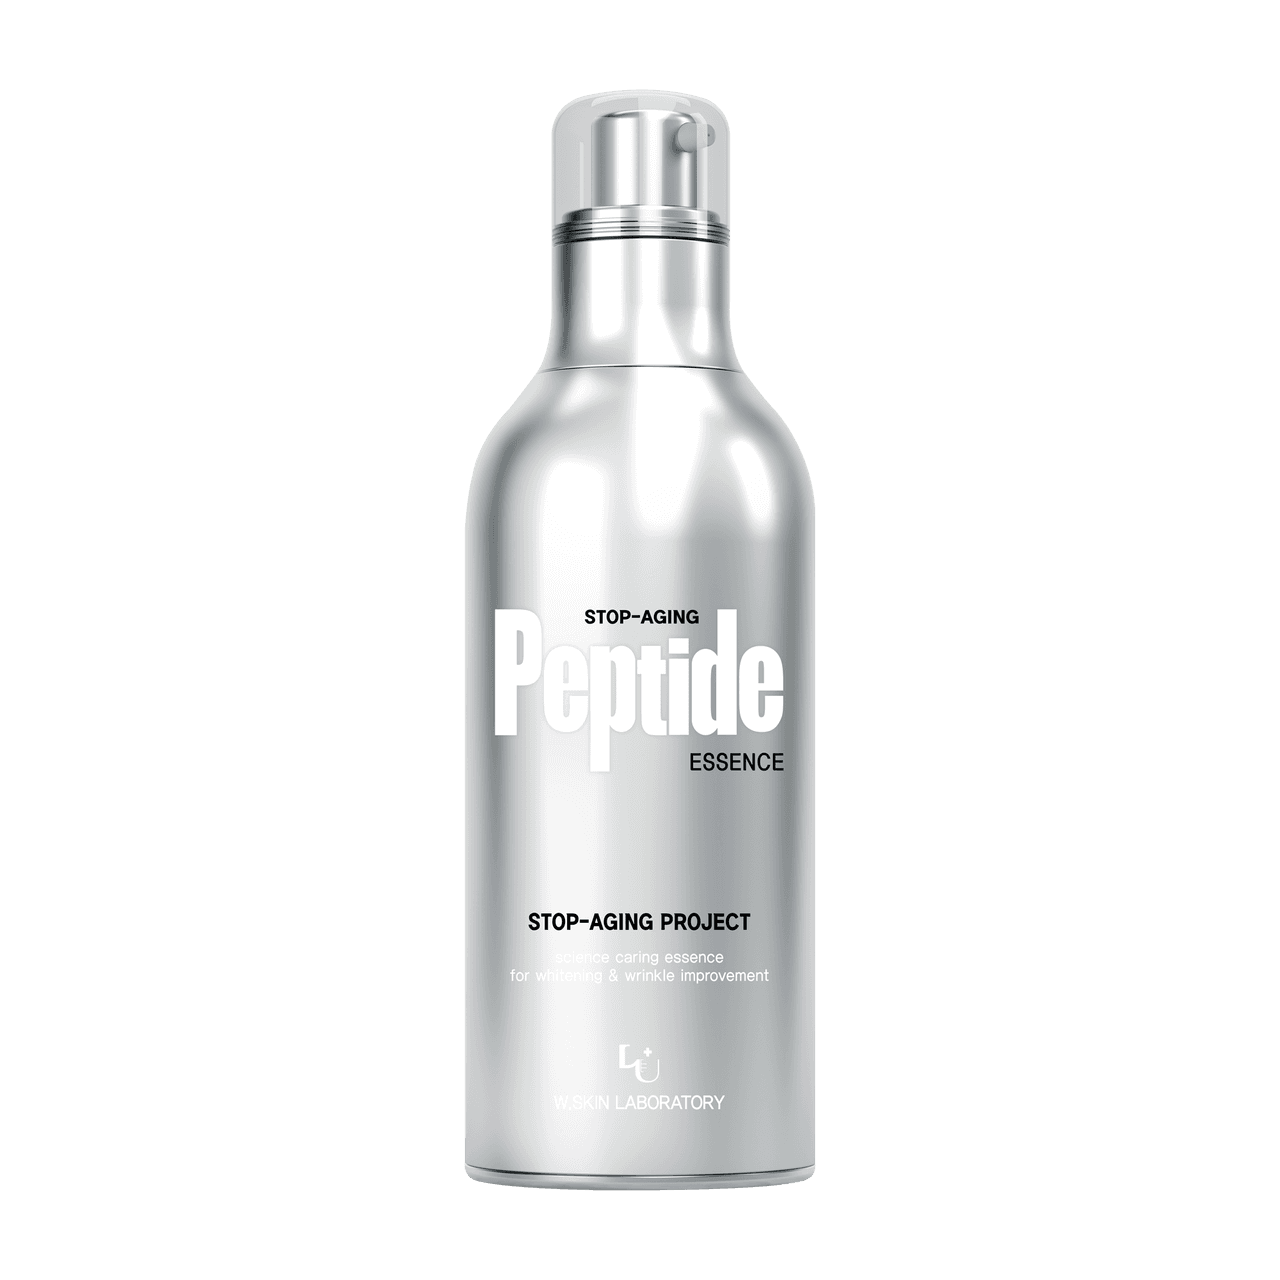 Stop Aging Peptide Essence